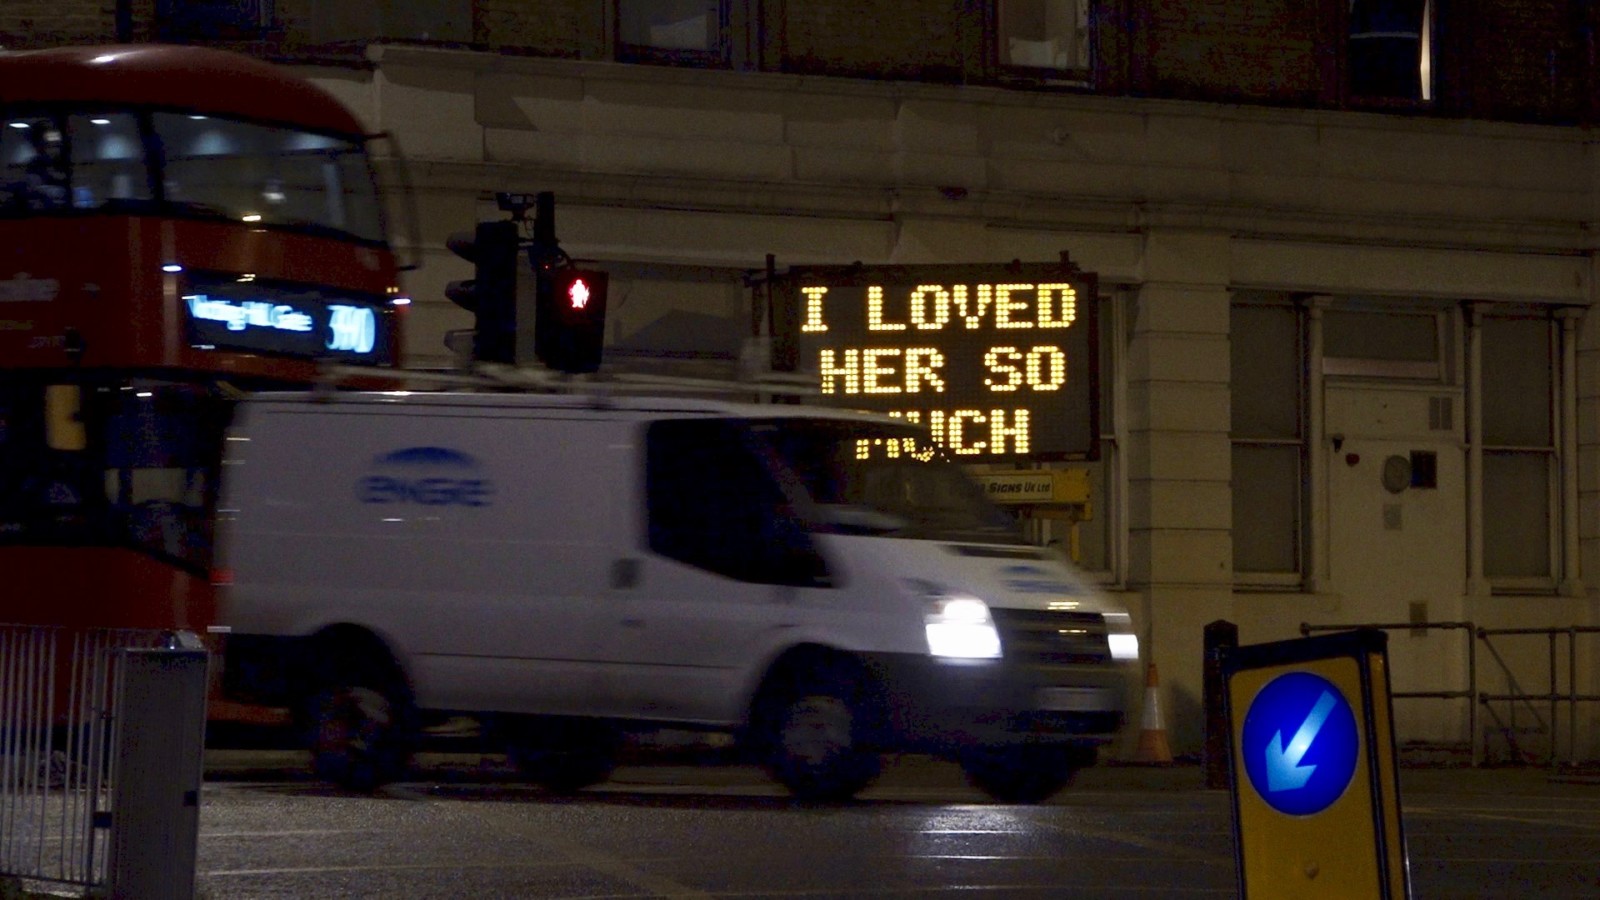 A white van drives in front of an illuminated traffic sign which reads 'I loved her so much.' The van is followed by a red double decker bus and the image has been taken at nighttime.